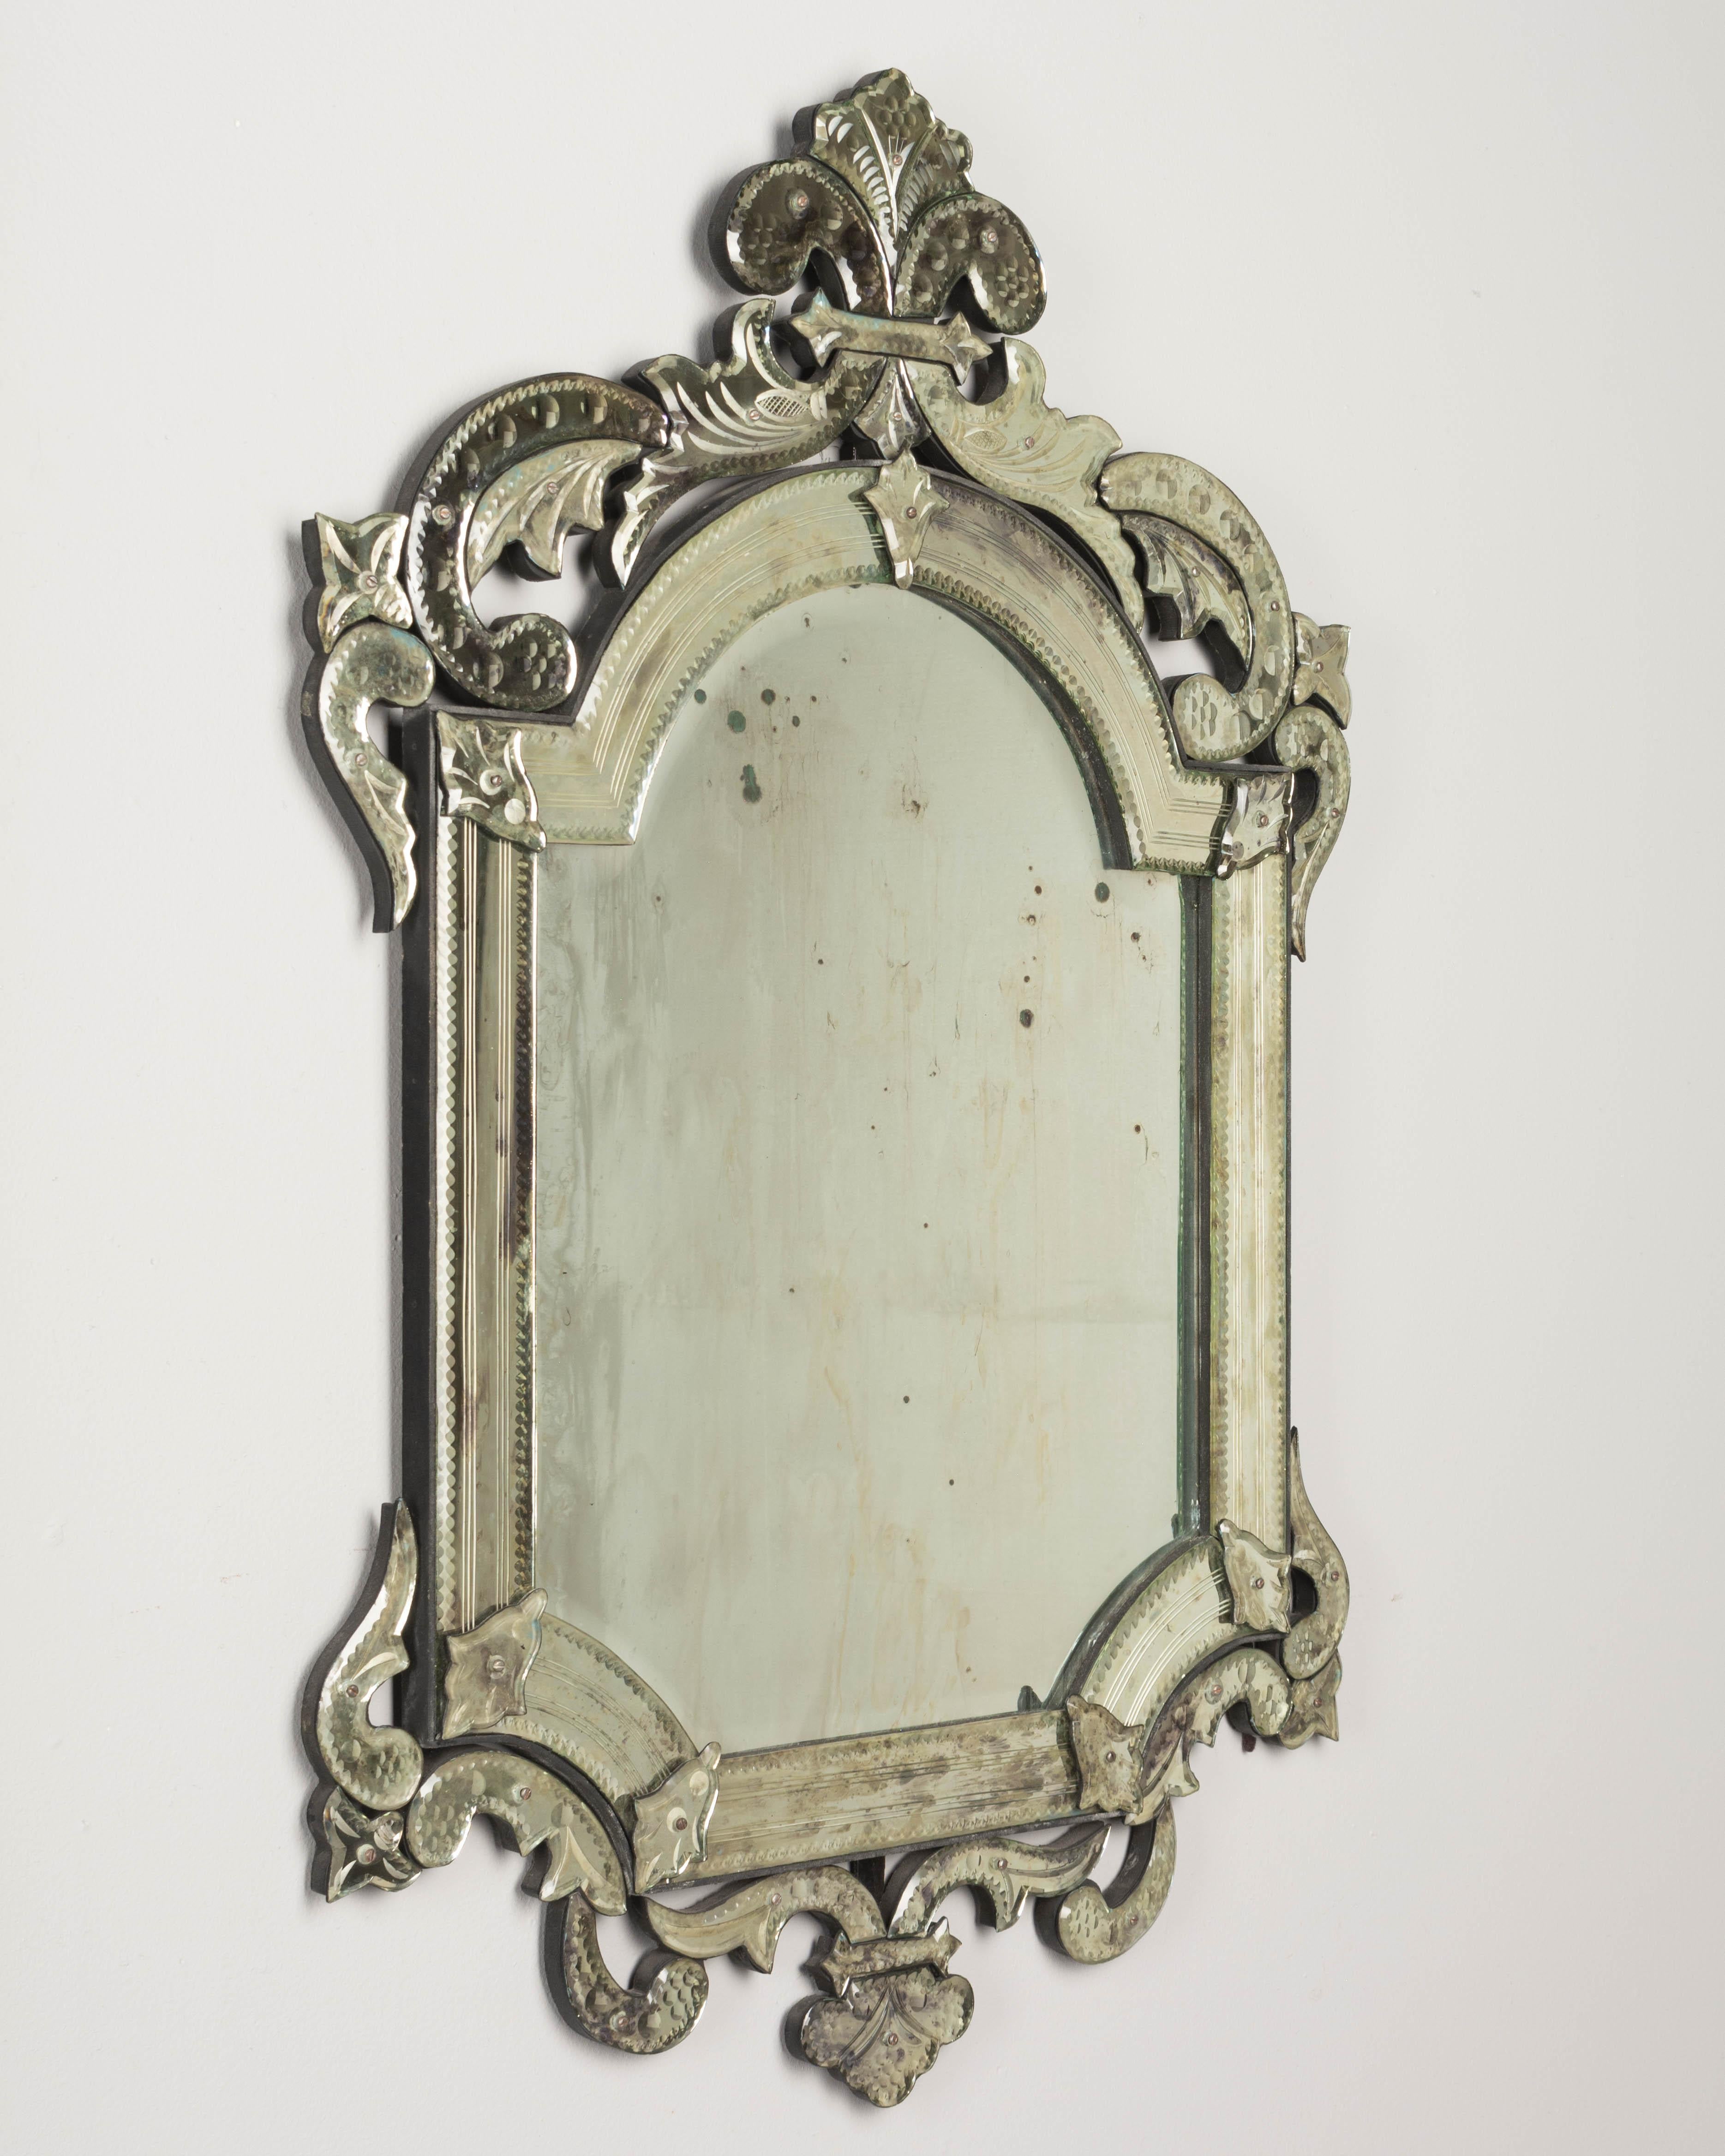 A vintage Venetian mirror with several separate scroll shaped pieces that have been cut, beveled and etched. Fleur de lys crown. Original looking glass with old fogging and silvering. Mirror pieces affixed to black painted wood backing. Nice muted